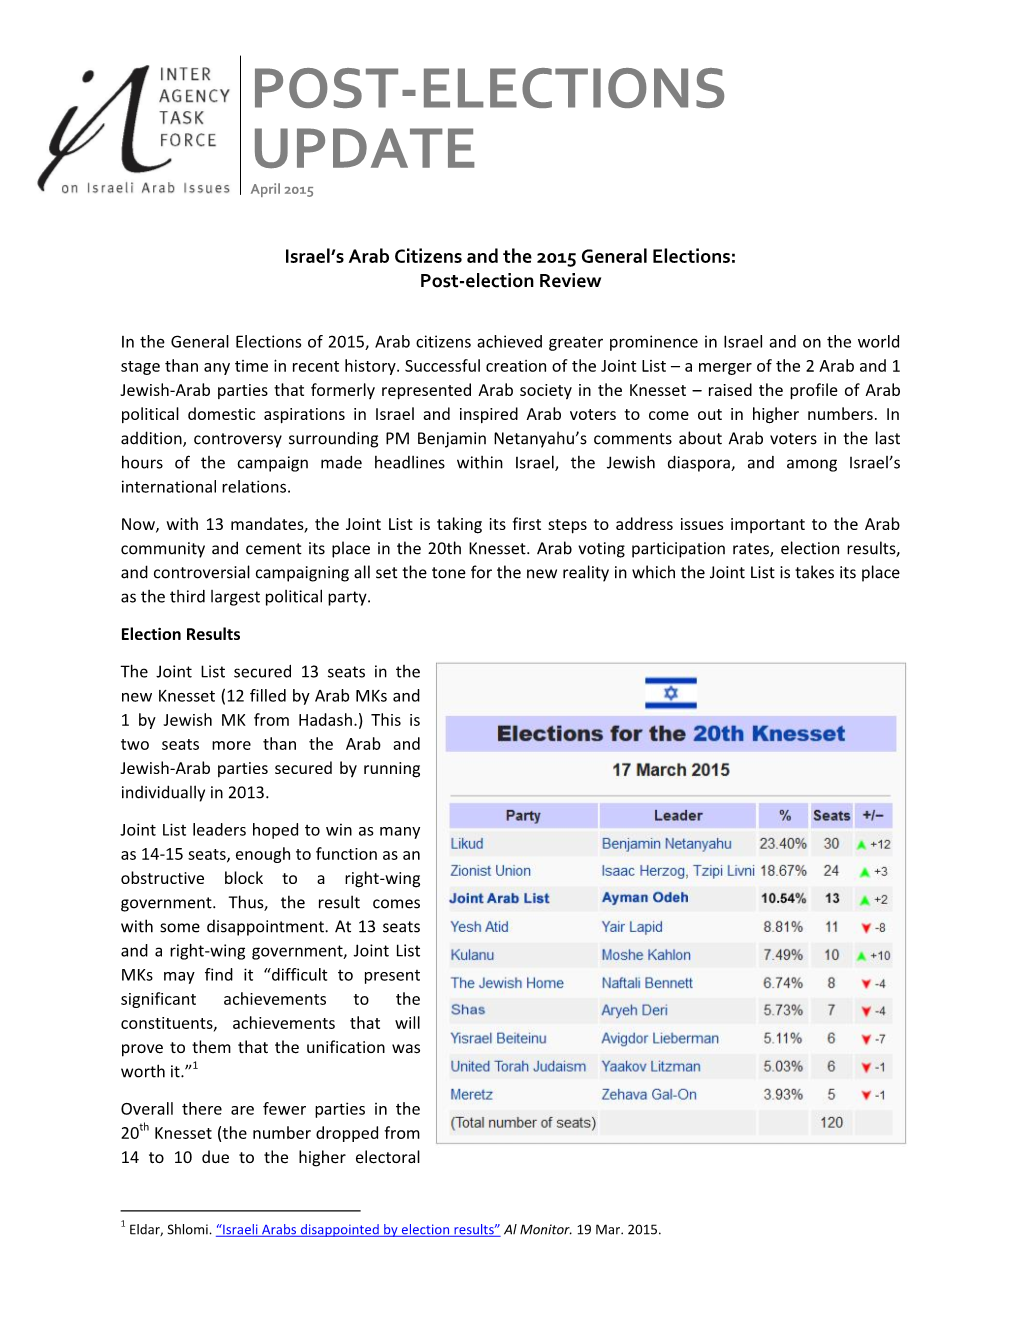 POST-ELECTIONS UPDATE April 2015